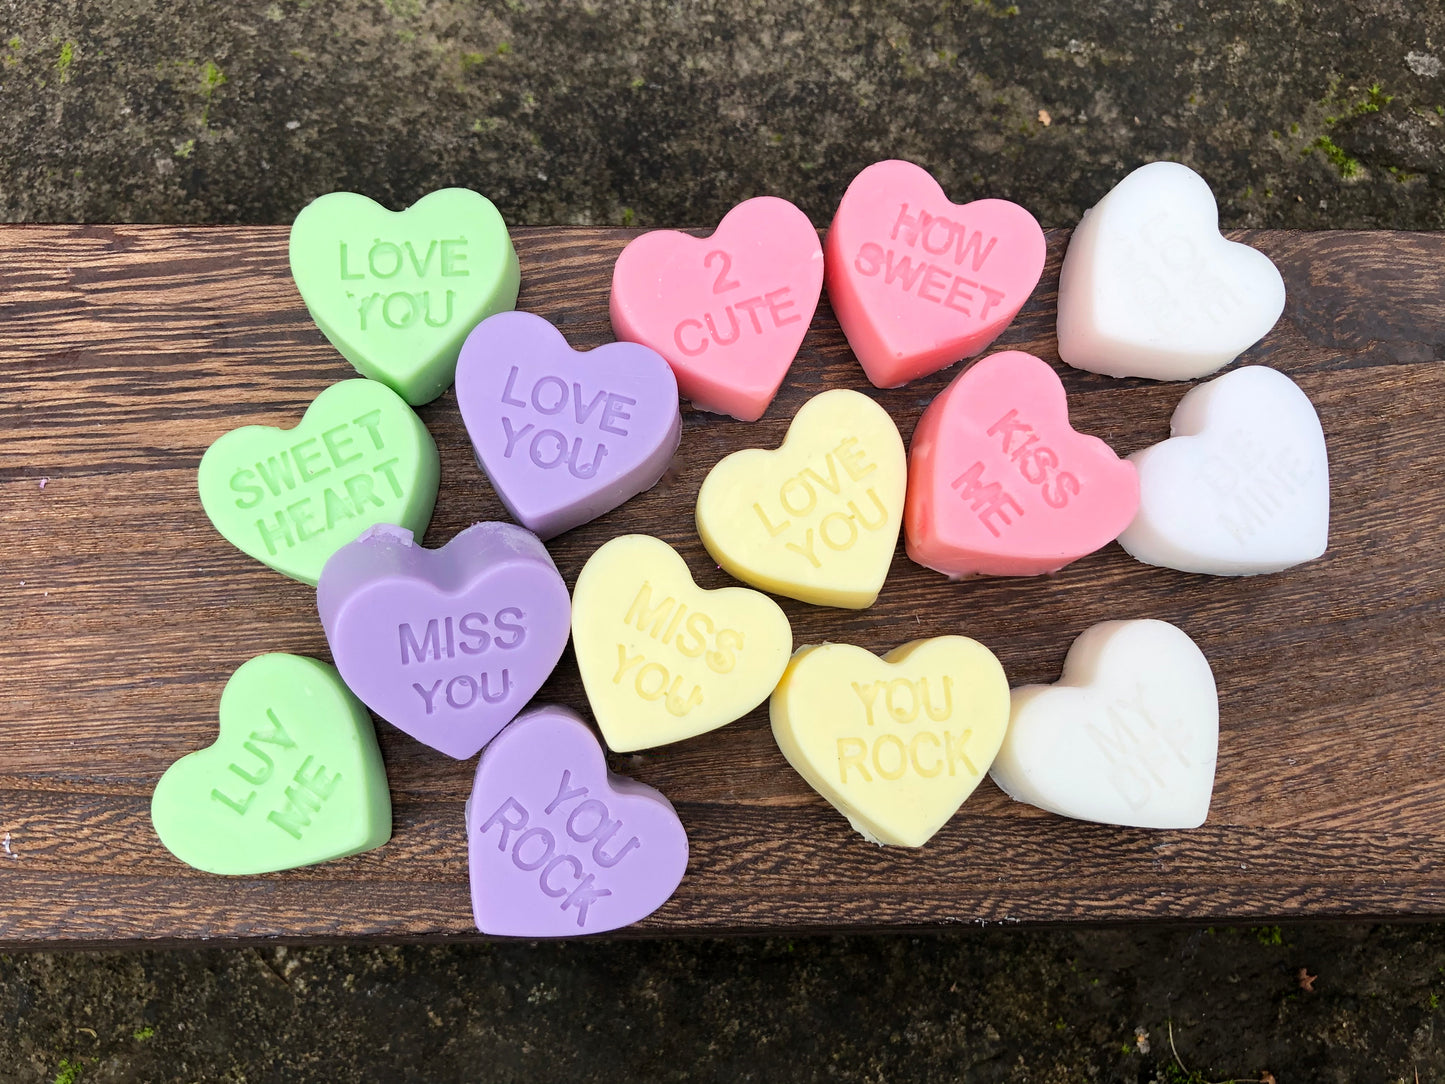 Mini Conversation heart soaps, fun festive and functional, Valentines soaps. 14 assorted heart soaps.